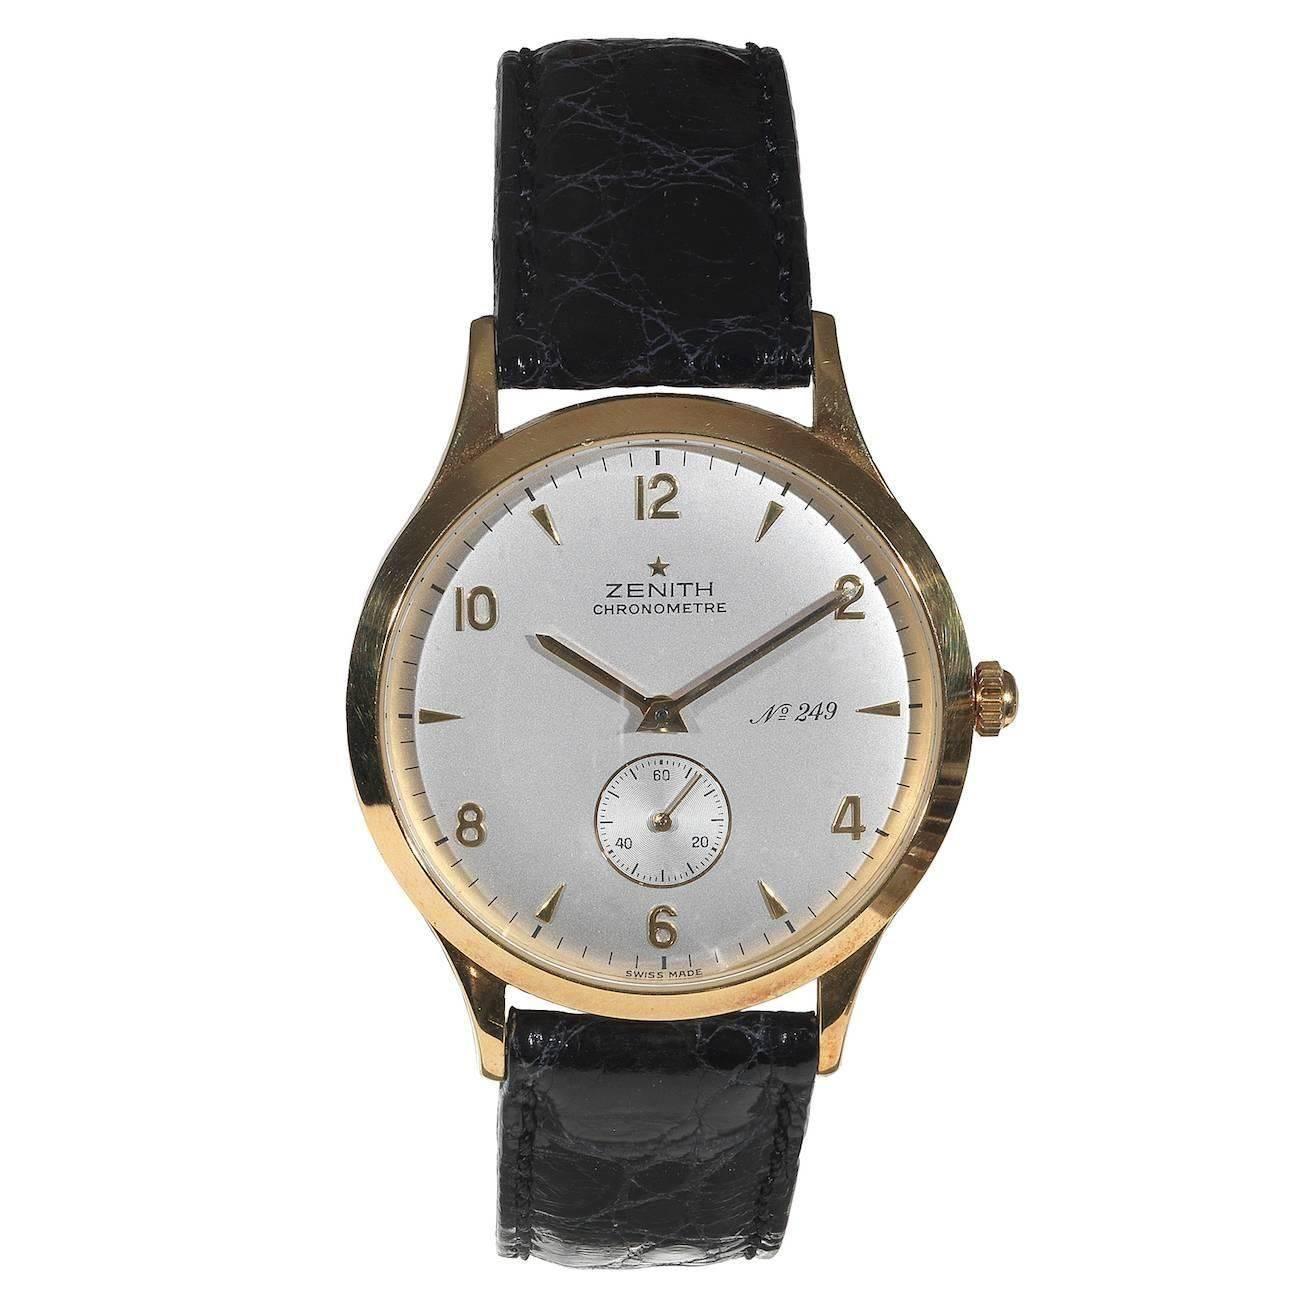 No. 249/300, made in 1990

Fine and rare, water-resistant to 30 m., 18K yellow gold gentleman's chronometer wristwatch with leather strap and 18K yellow gold Zenith buckle.

Dial white enamel with applied gold indexes and Arabic numerals,